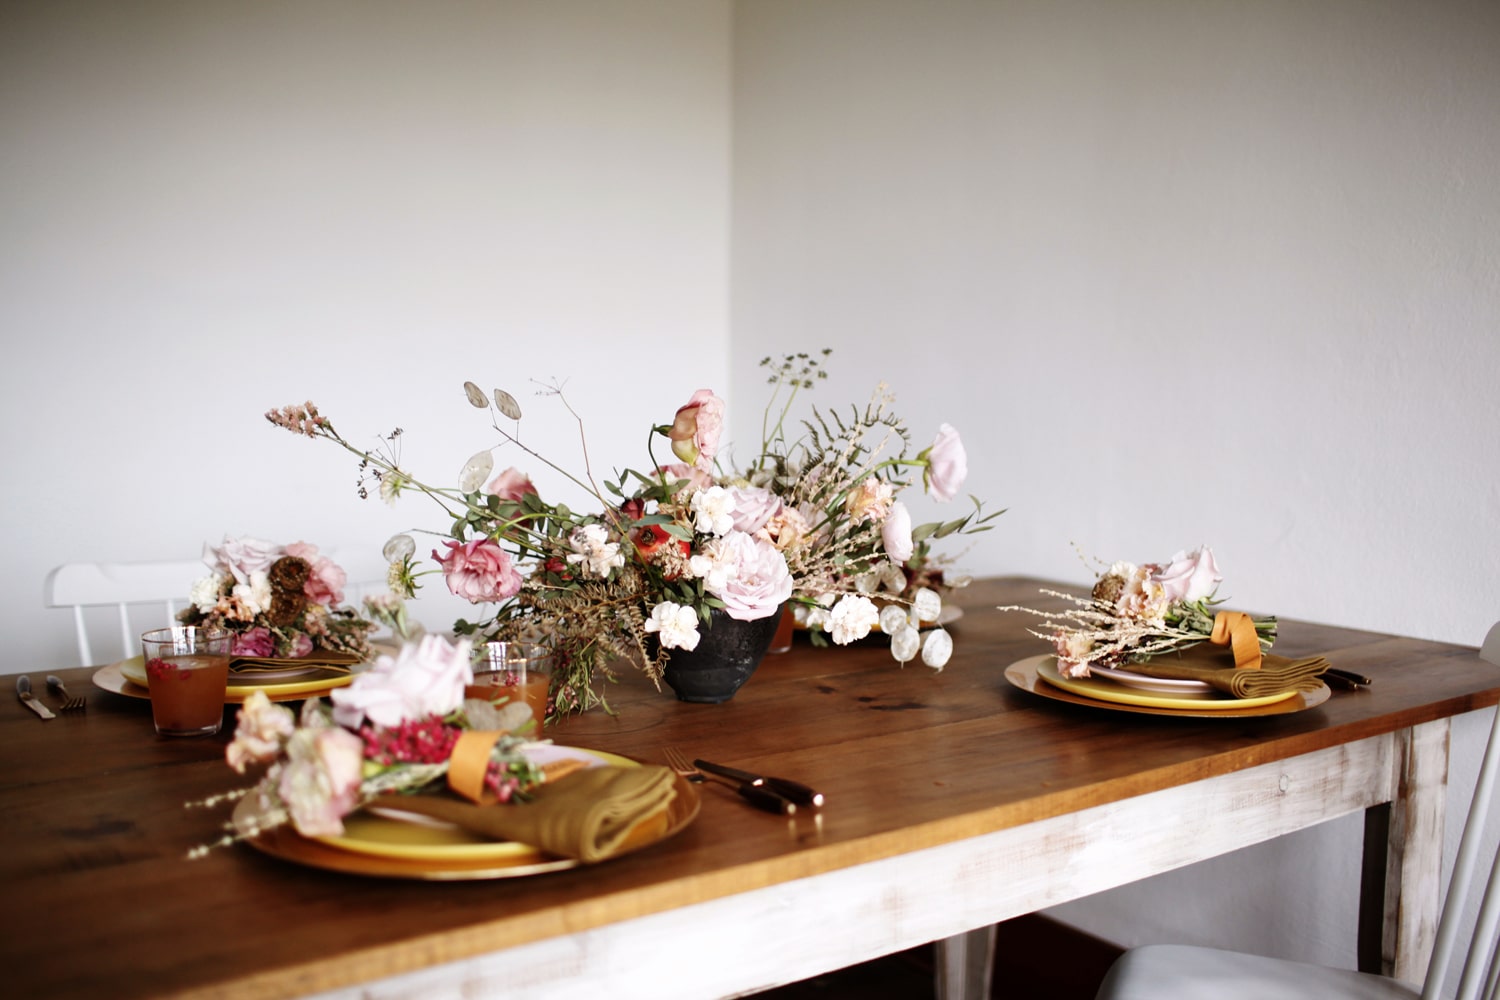 fall posy bouquets at every place setting for Thanksgiving | via coco kelley